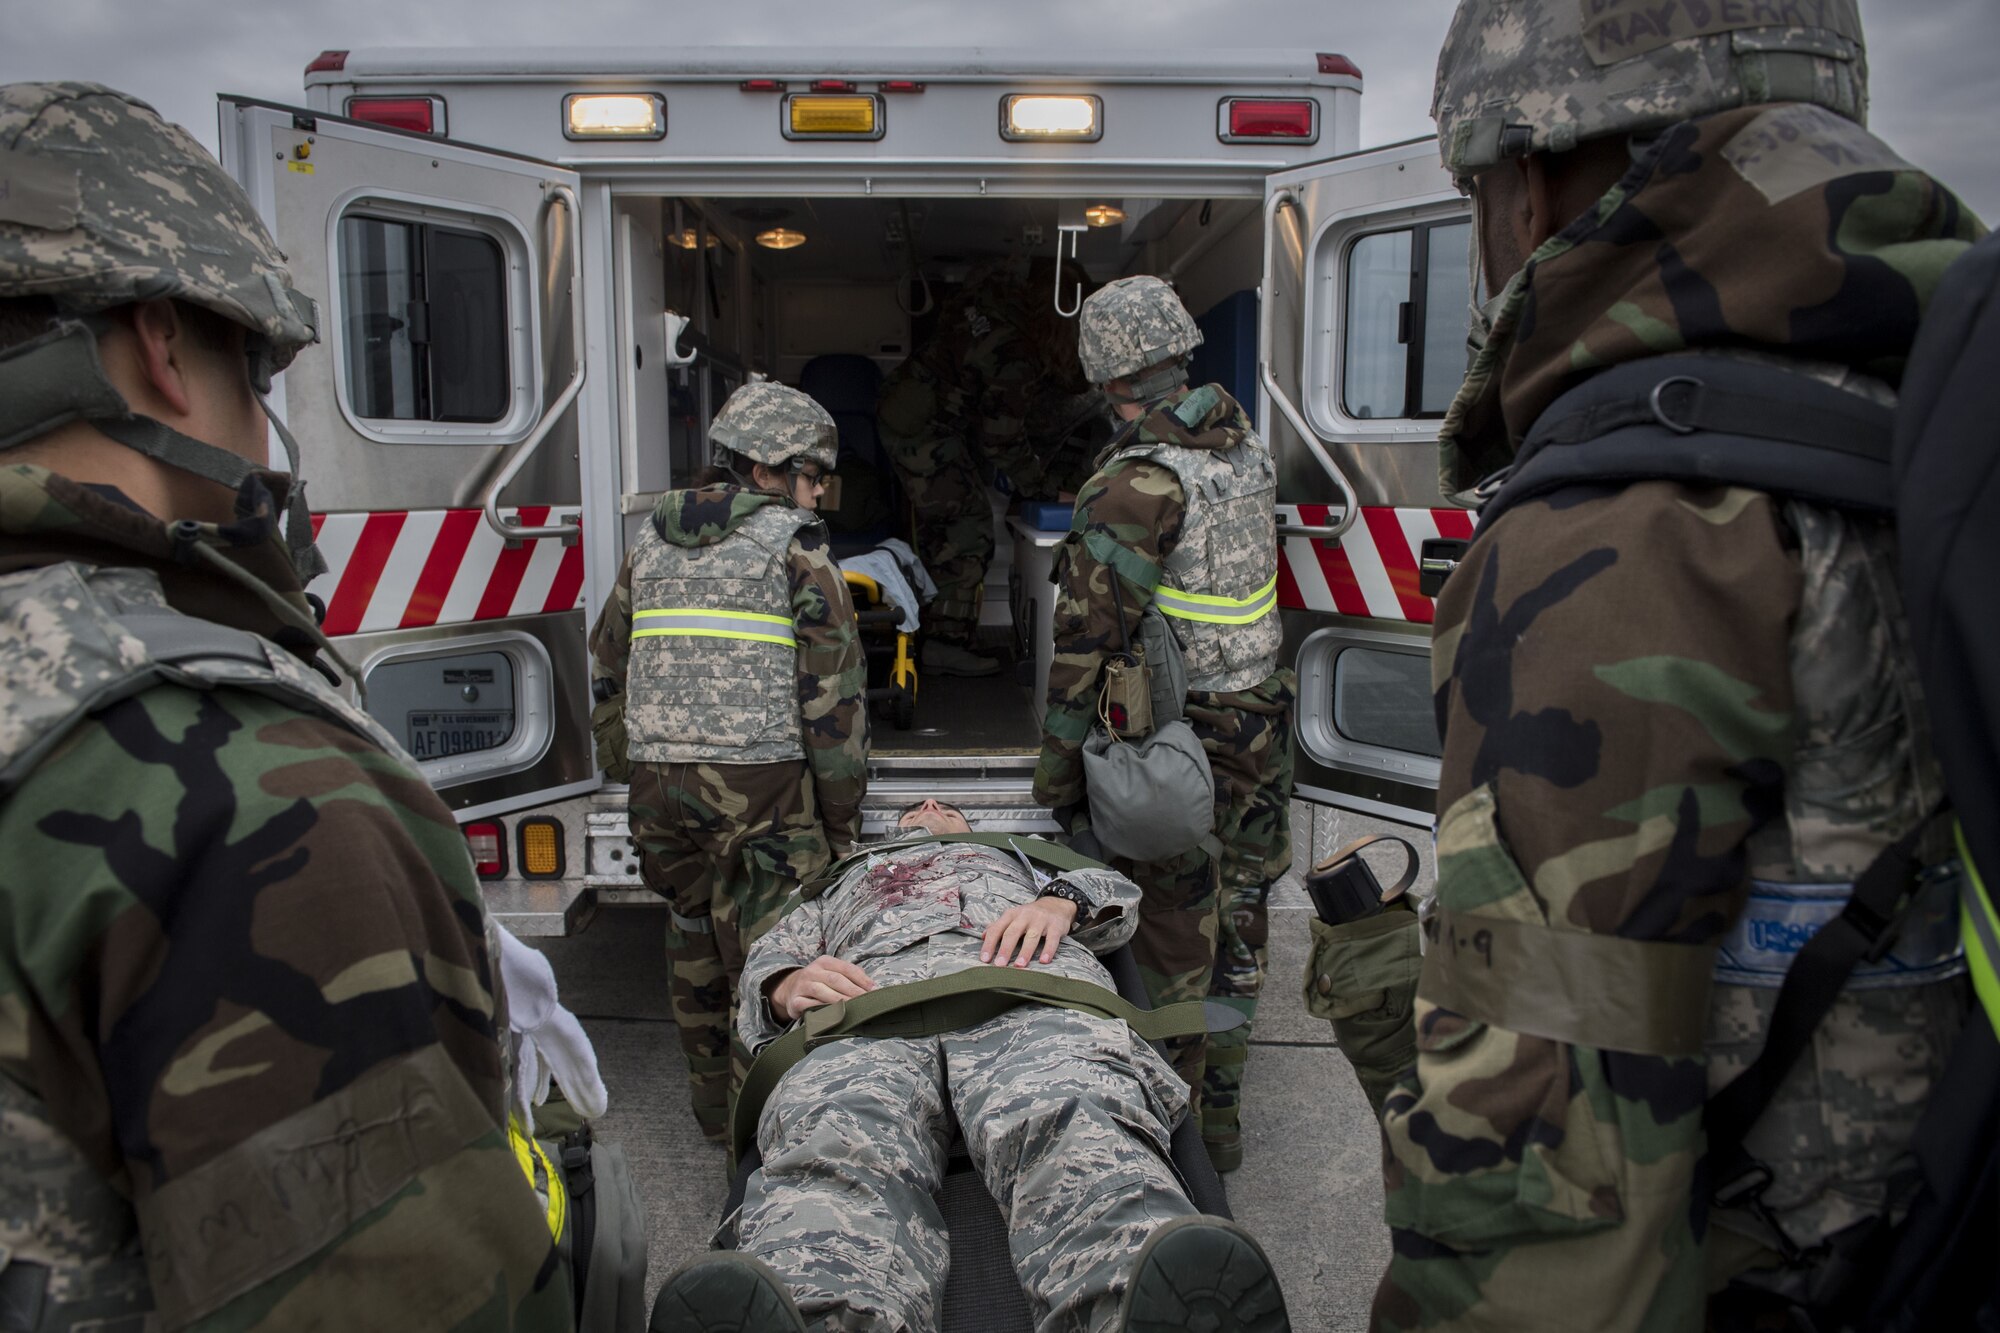 Emergency response crews from the 374th Medical Squadron place a simulated victim in an ambulance during exercise Beverly Morning 17-08 in conjunction with exercise Vigilant Ace 18, Dec. 4, 2017, at Yokota Air Base, Japan.